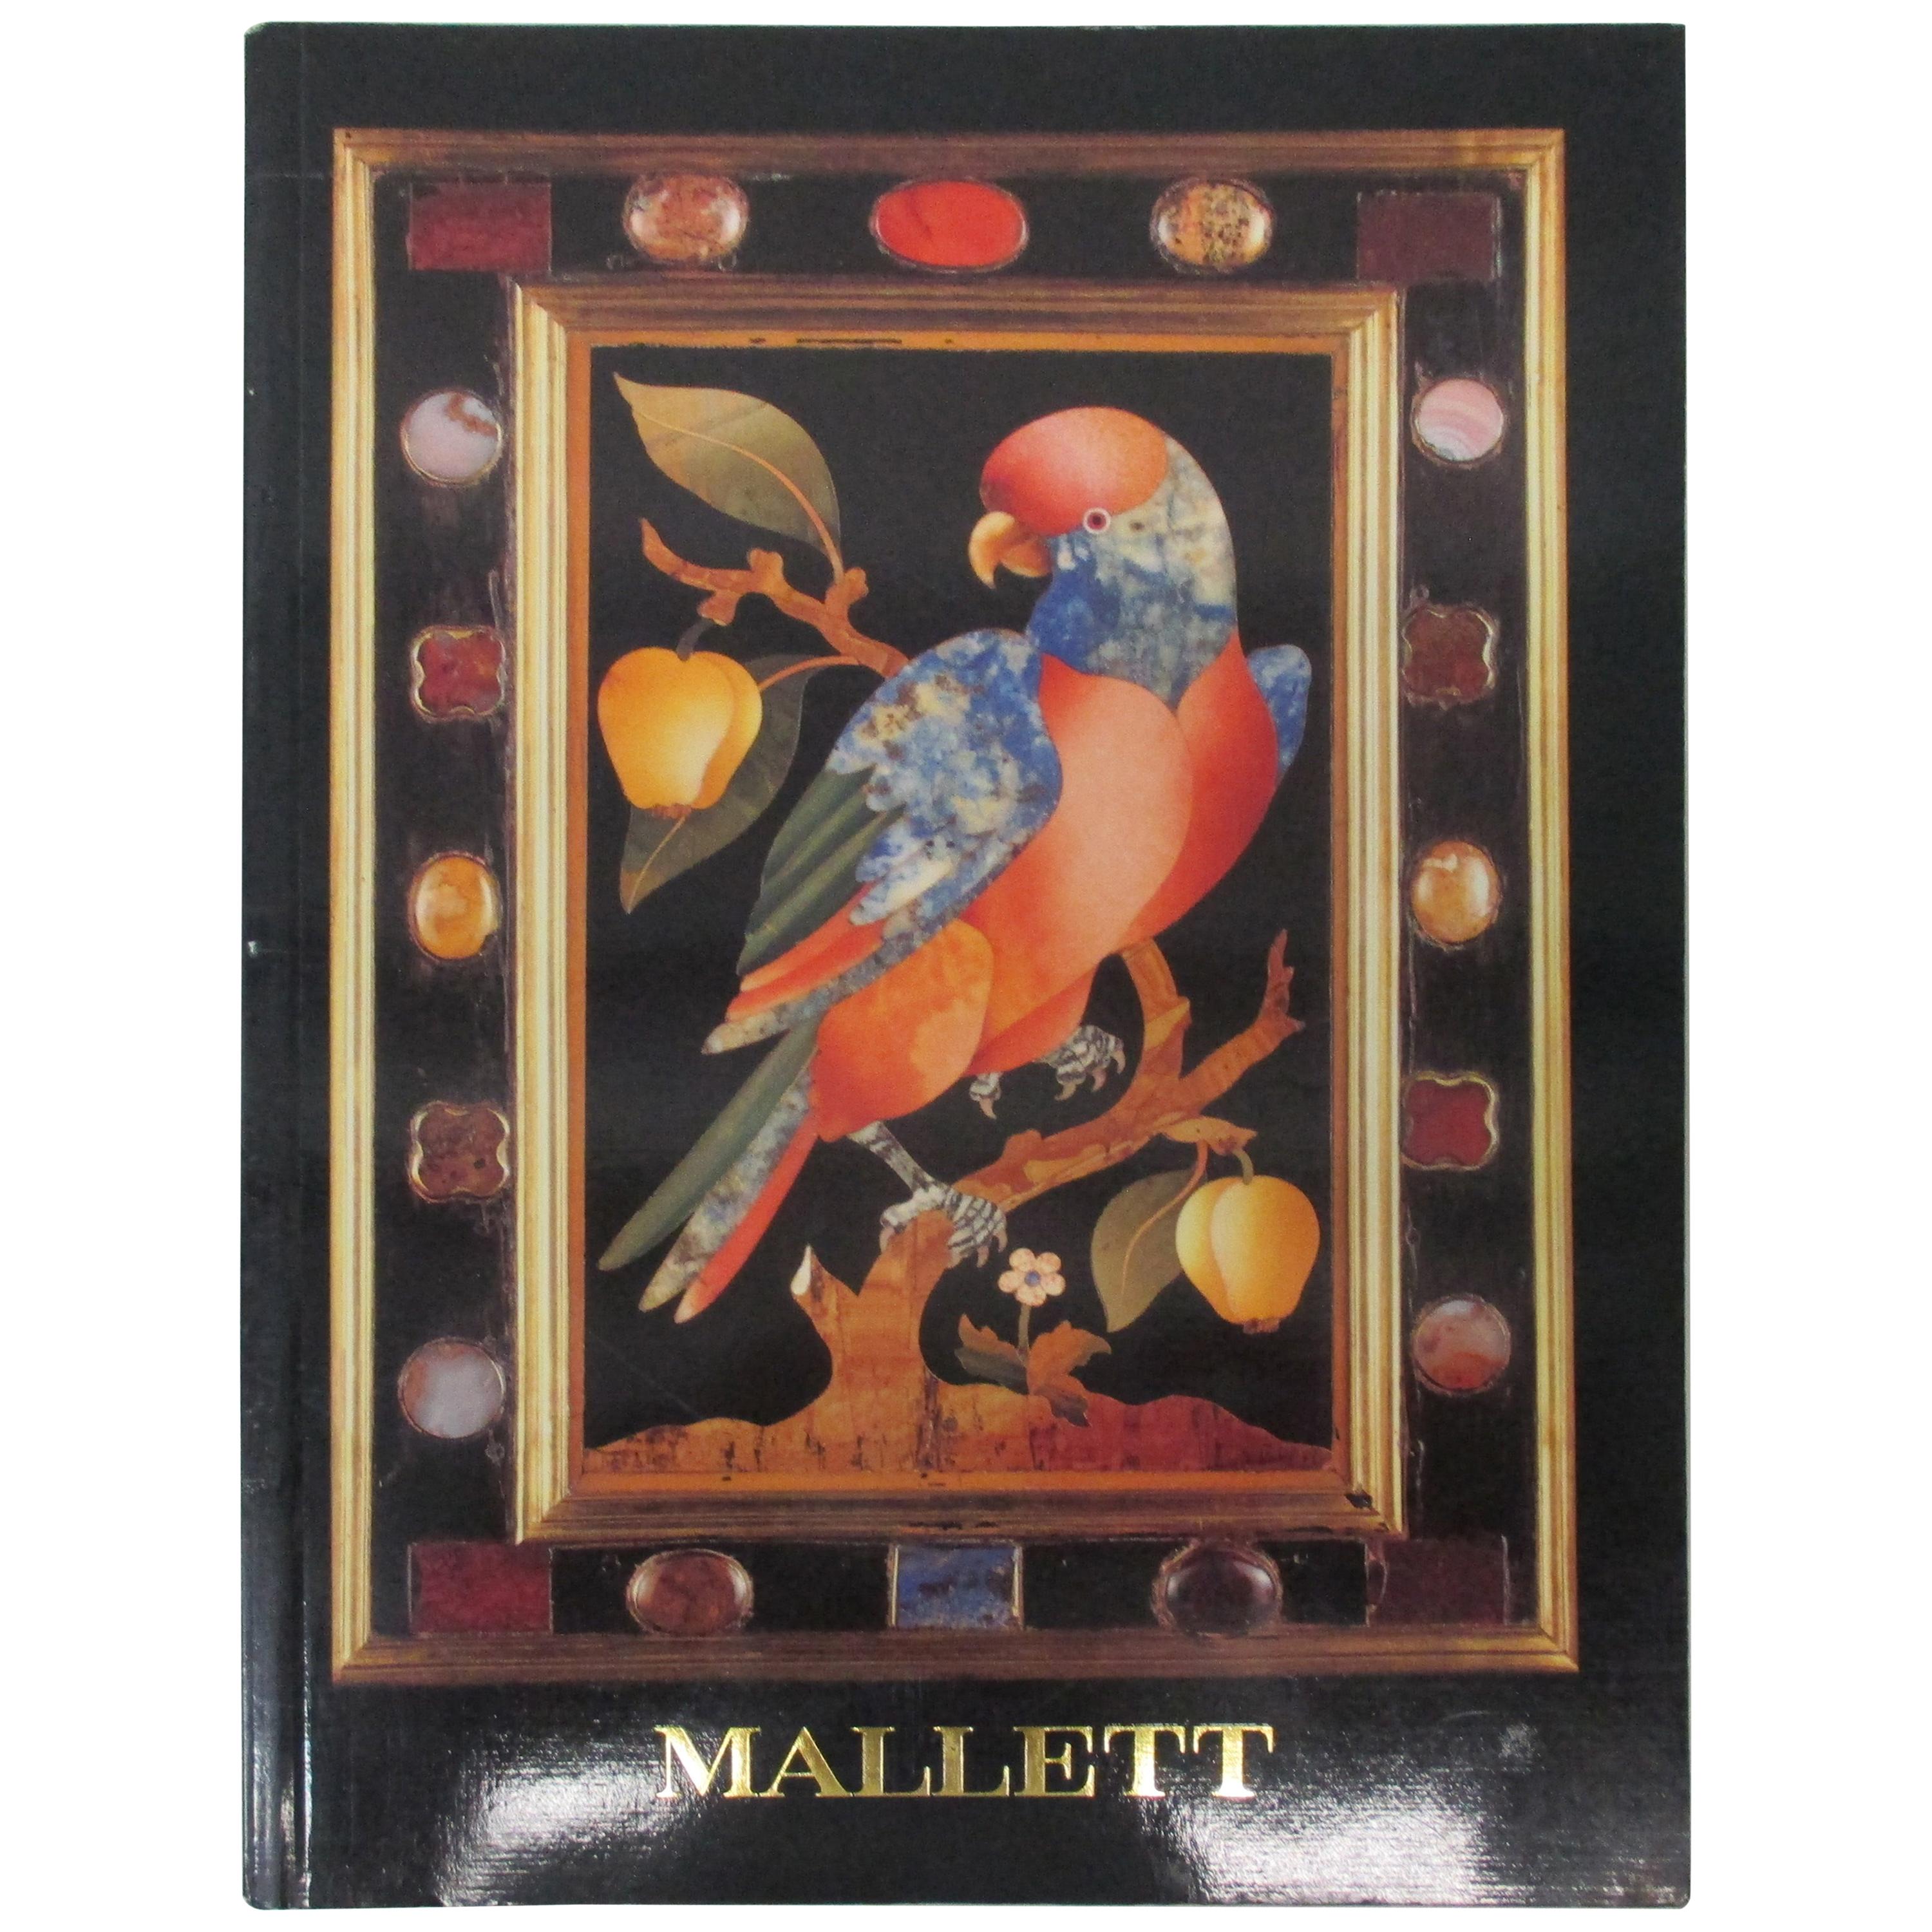 Mallet: English & Continental Antique Furniture and Objet's d'Art